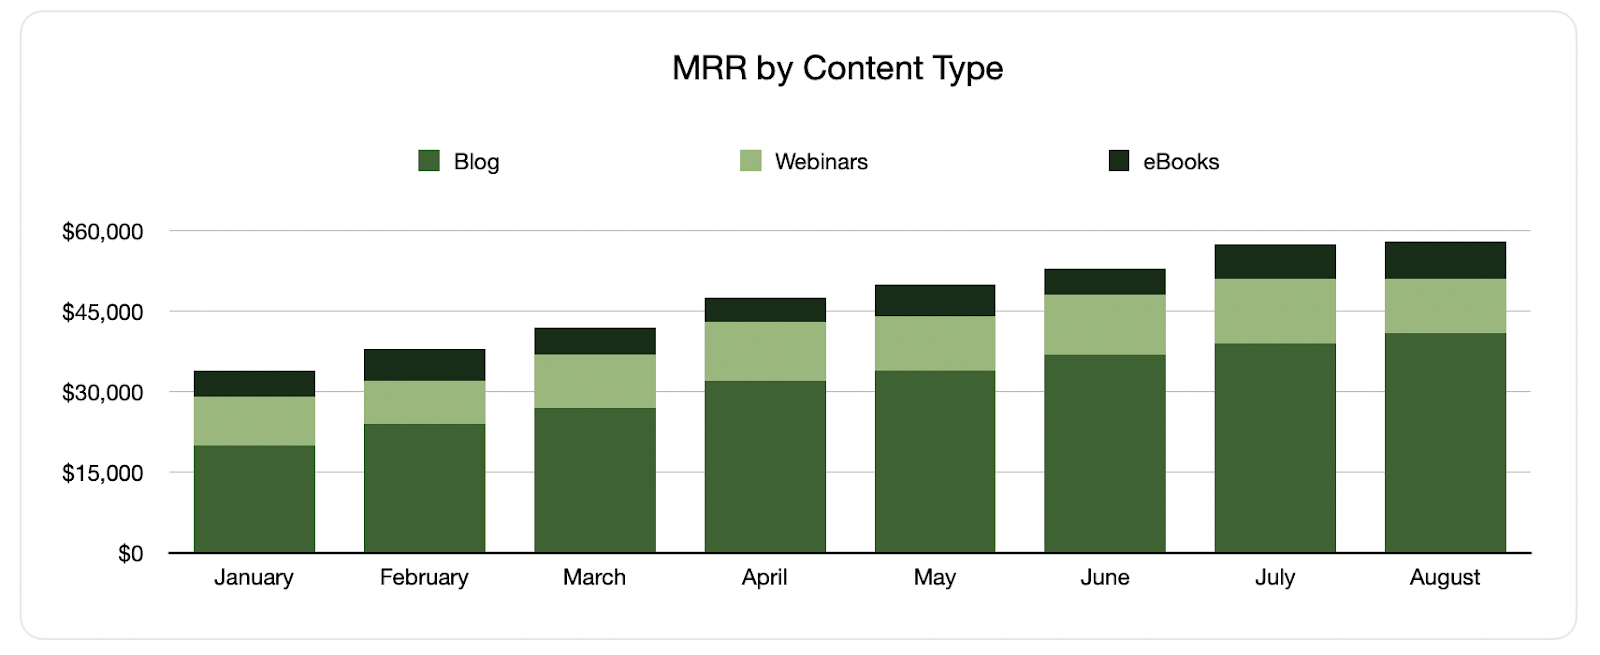 MRR by content type